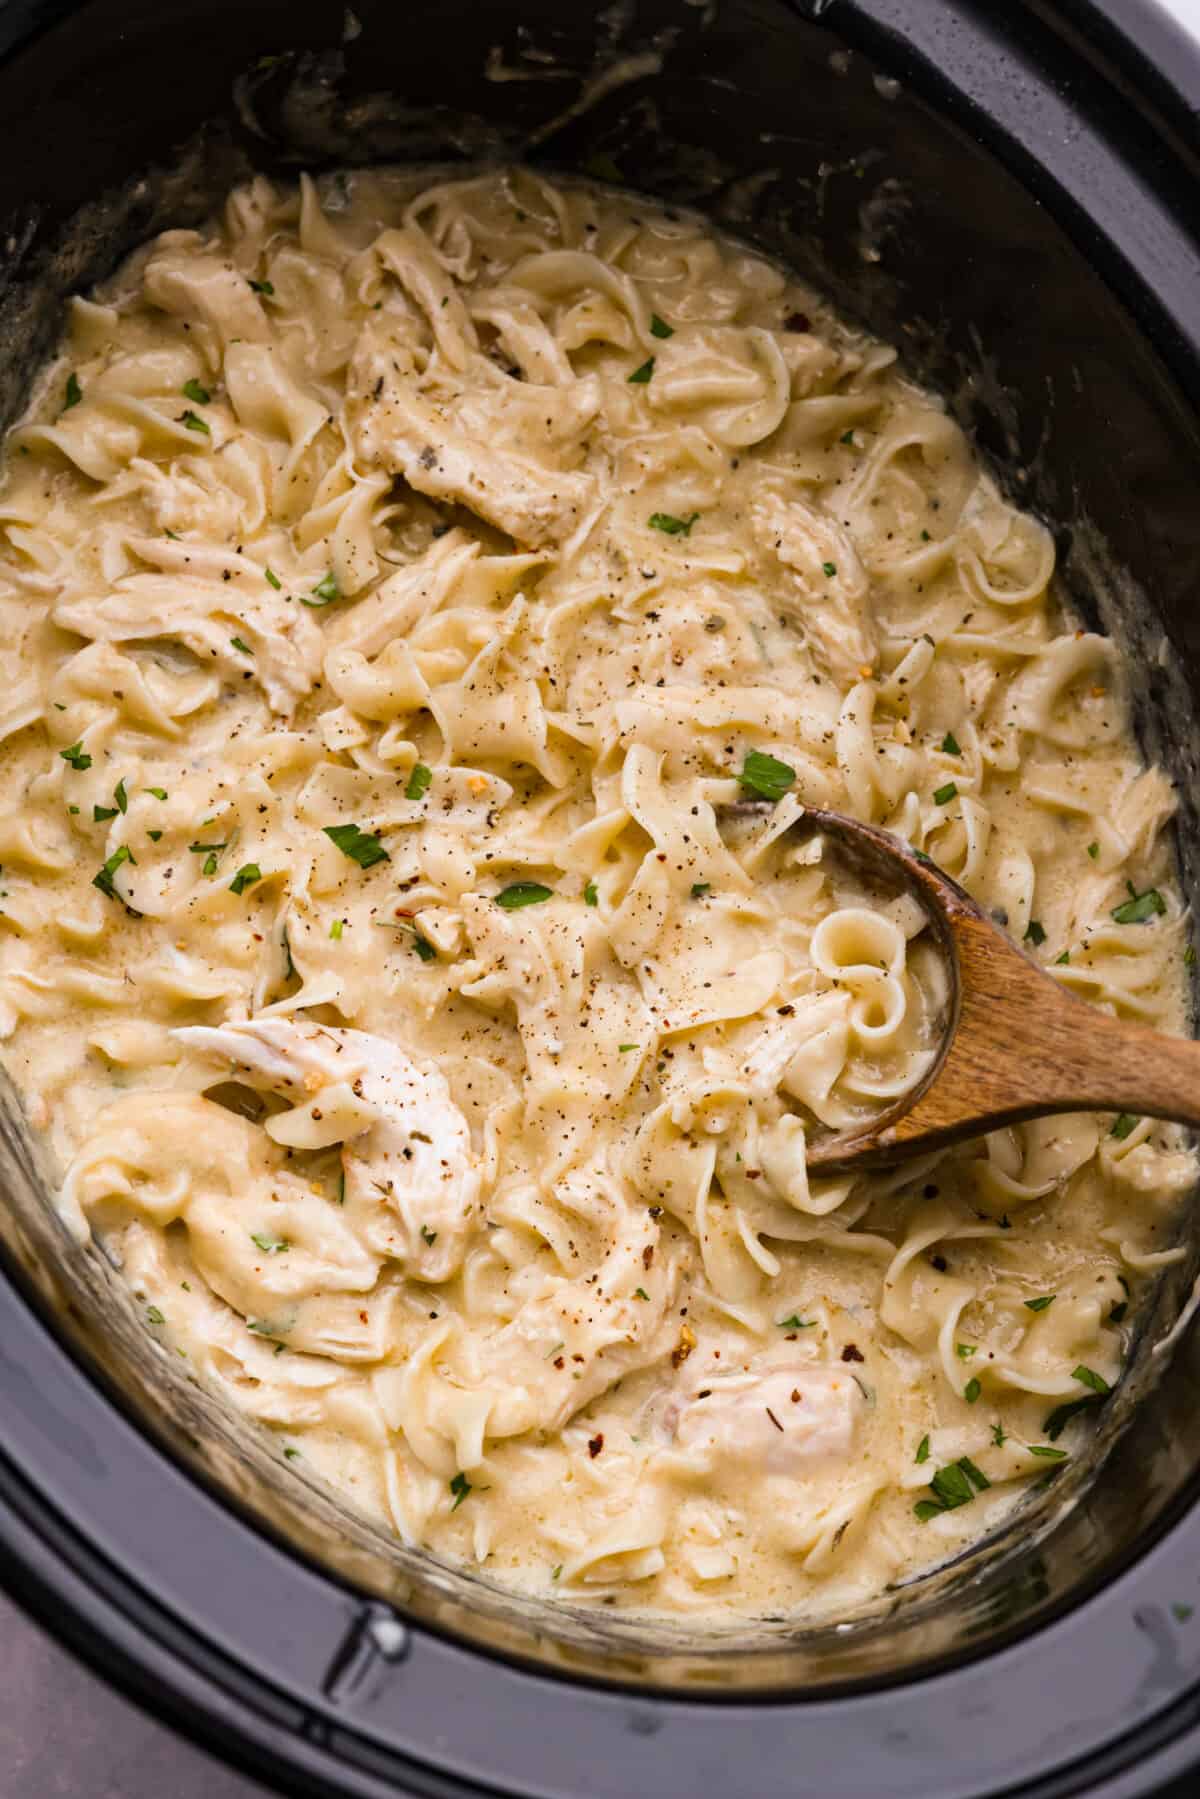 Creamy chicken and noodles in the slow cooker.